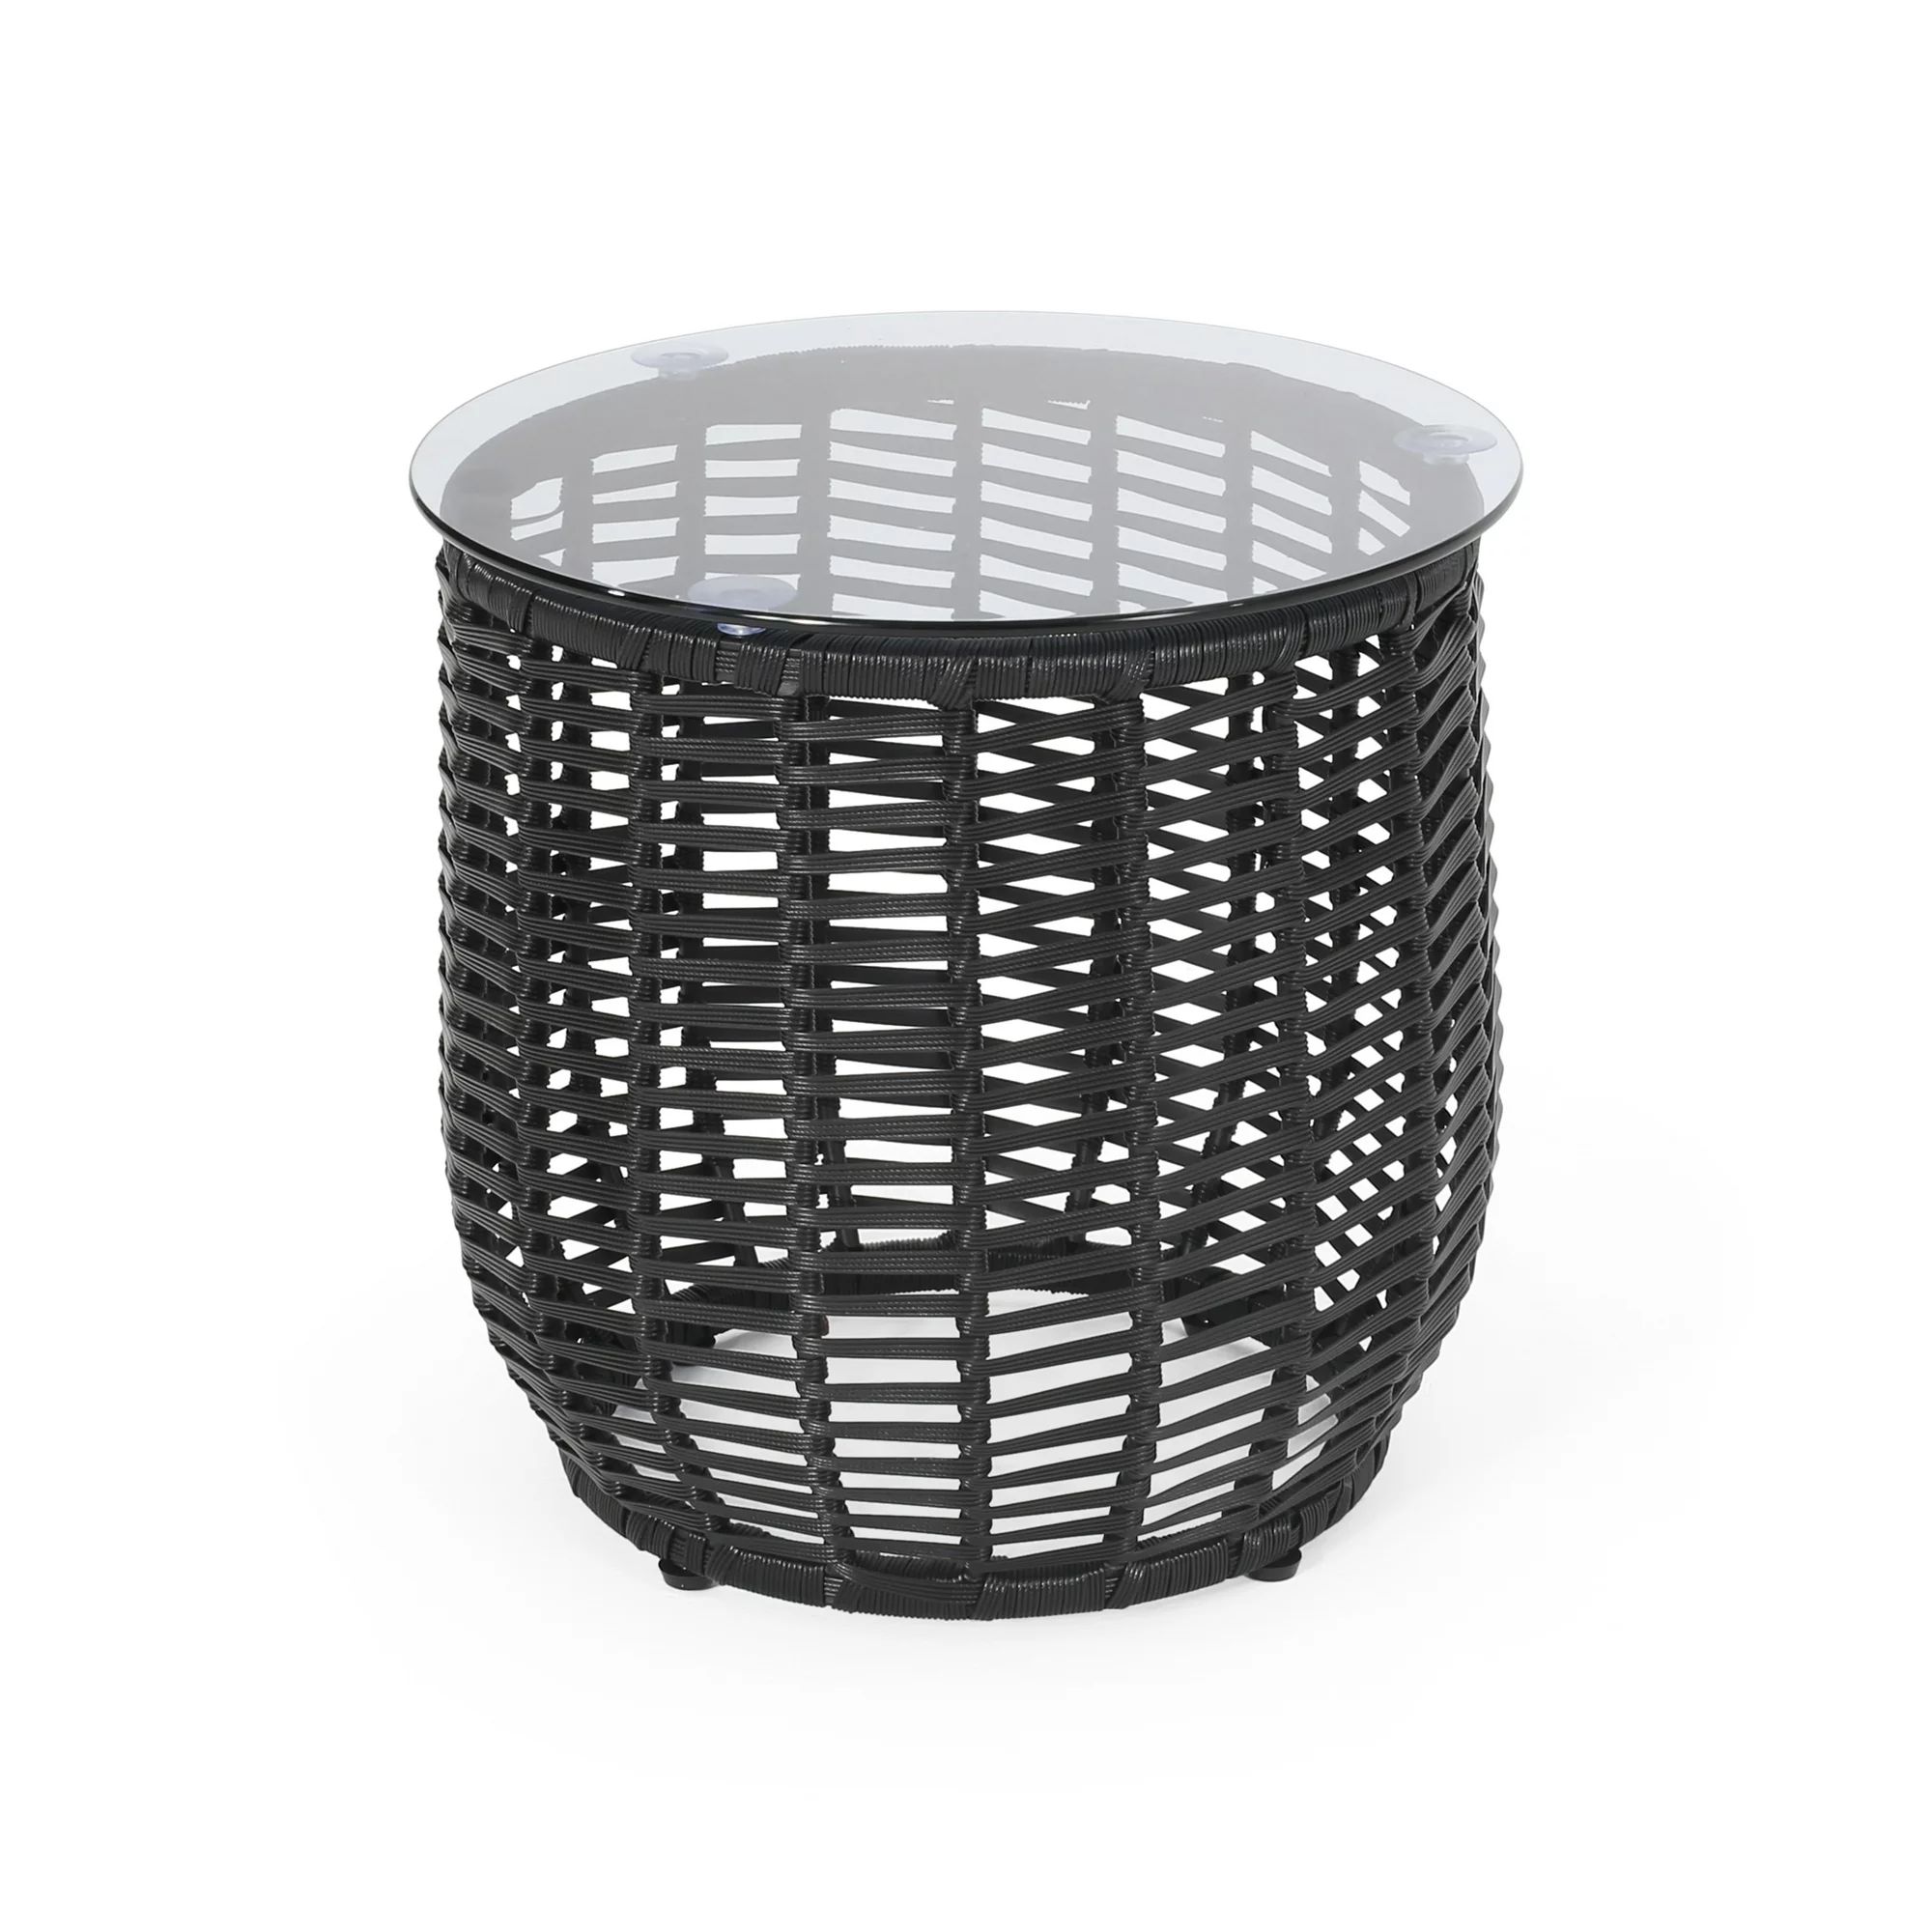 Kriday Wicker Side Table with Tempered Glass Top, Black | Walmart (US)